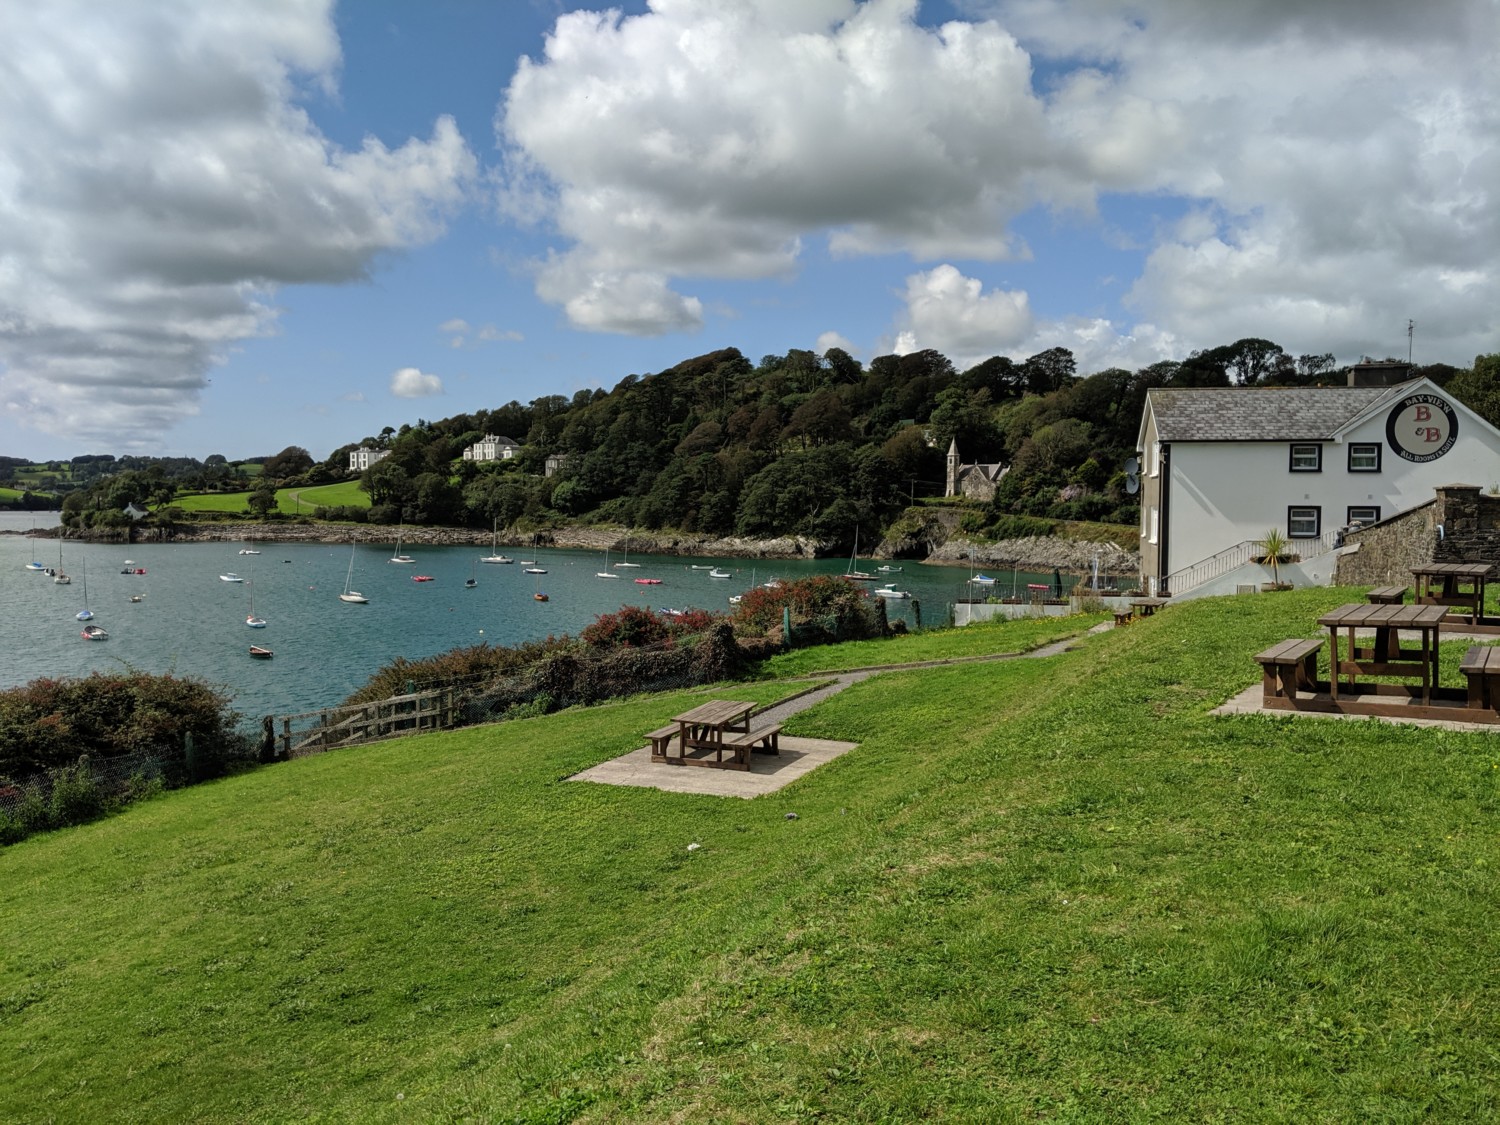 A waterfront view of a park in Glandore, Ireland